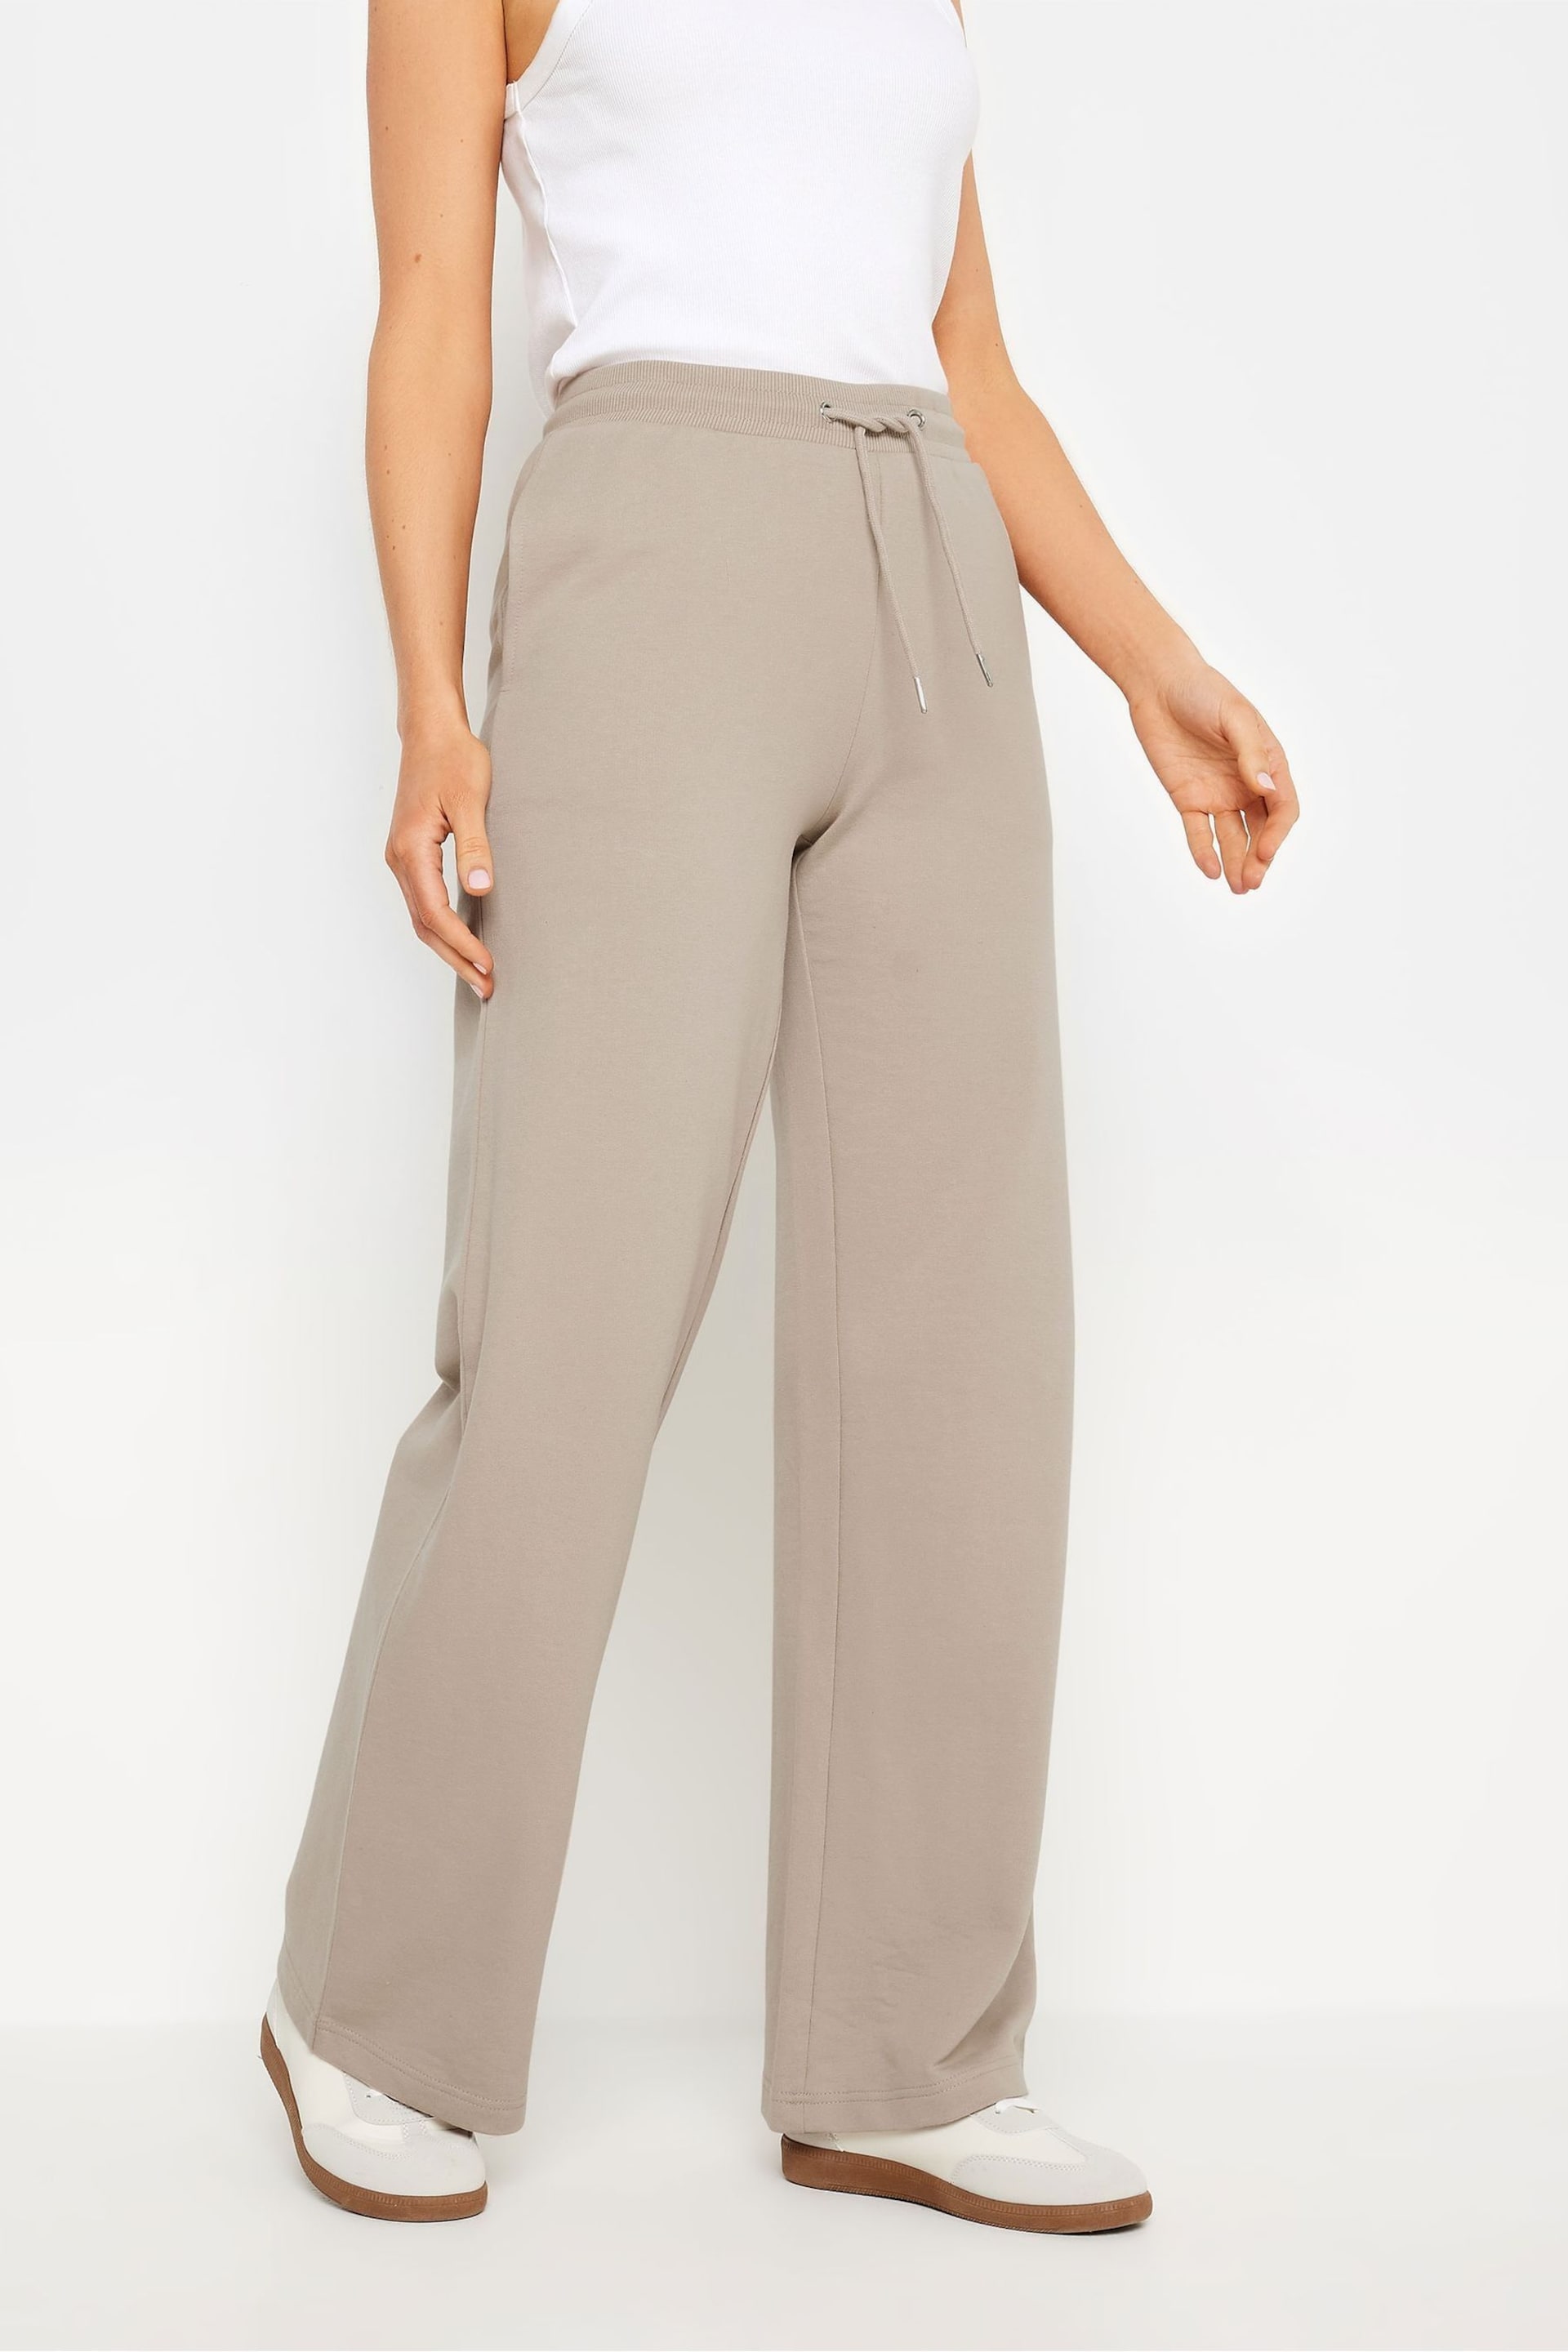 Long Tall Sally Natural Wide Leg Joggers - Image 2 of 4